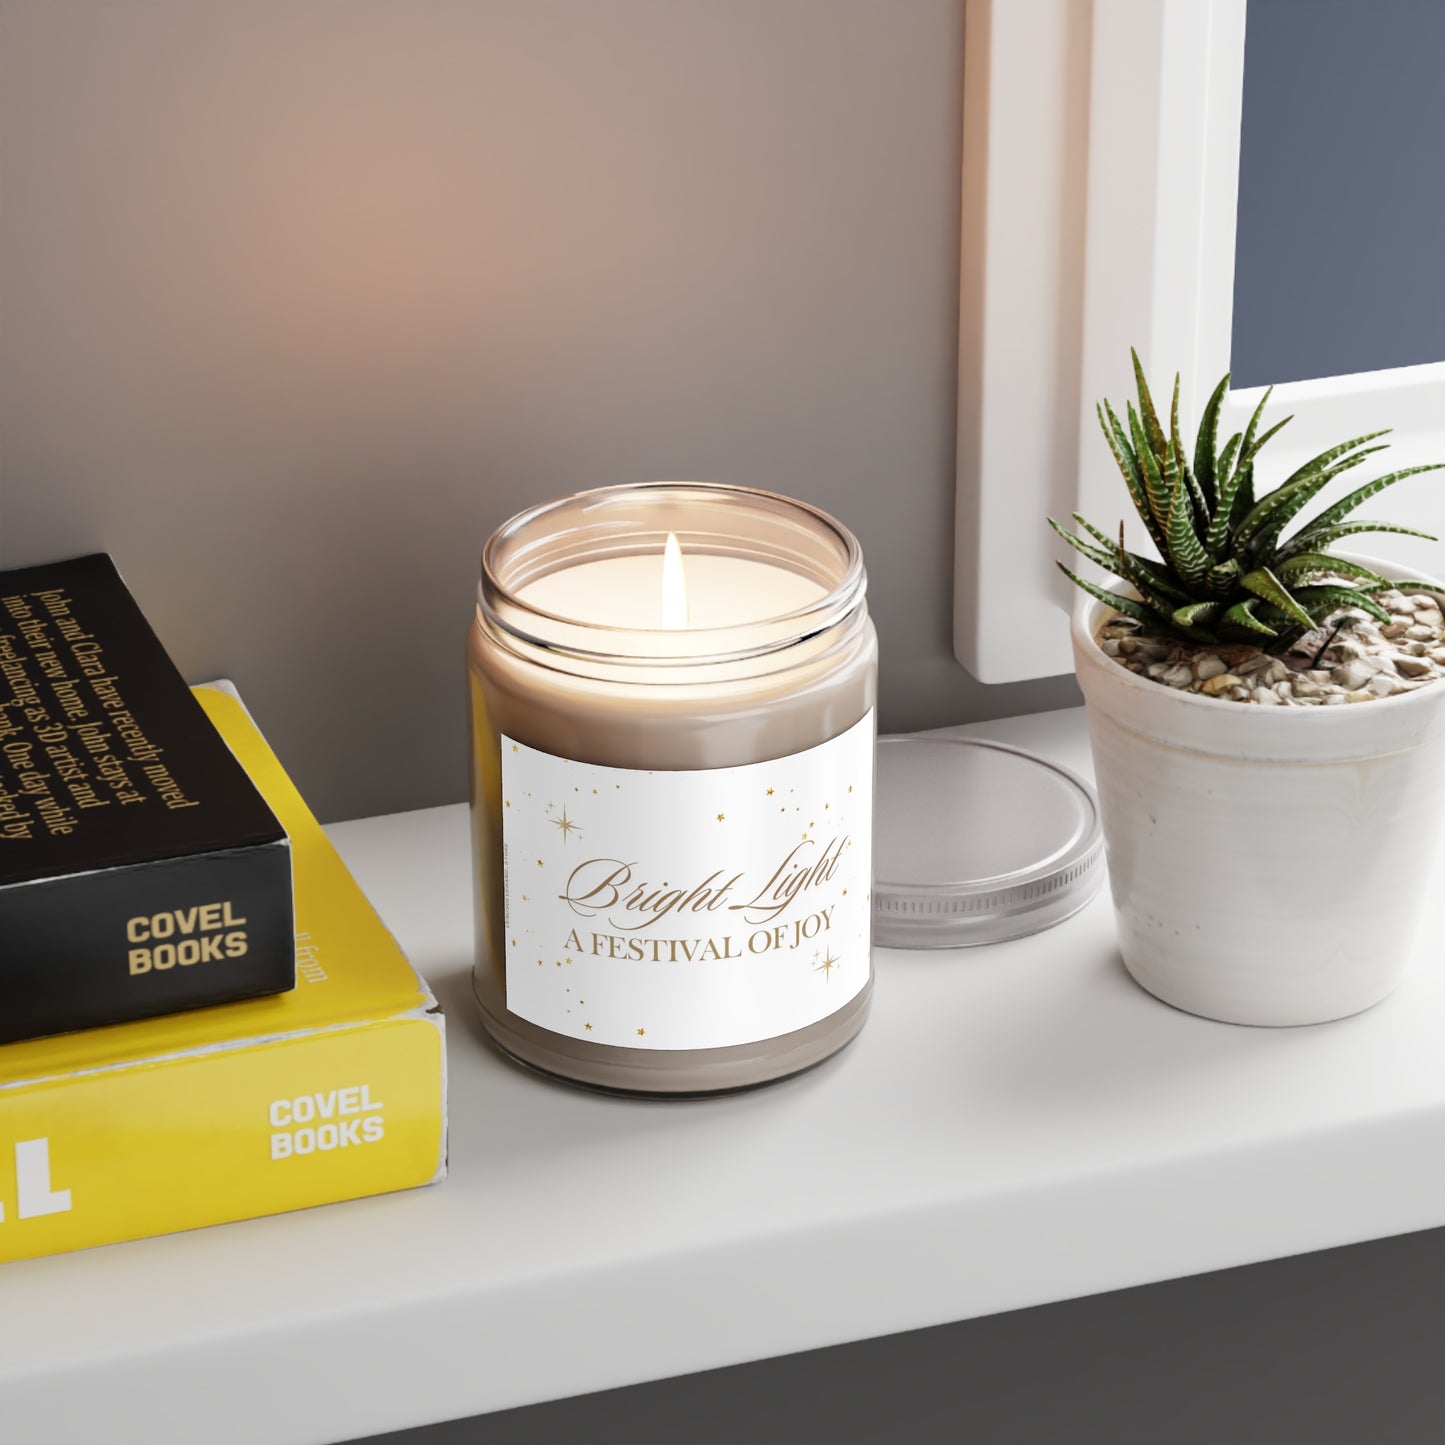 Scented Candles, 9oz - Bright light, a festival of JOY- Made 100% natural soy wax blend and cotton wick - Vanilla Bean, Comfort Spice and Sea Breeze fragrances available.